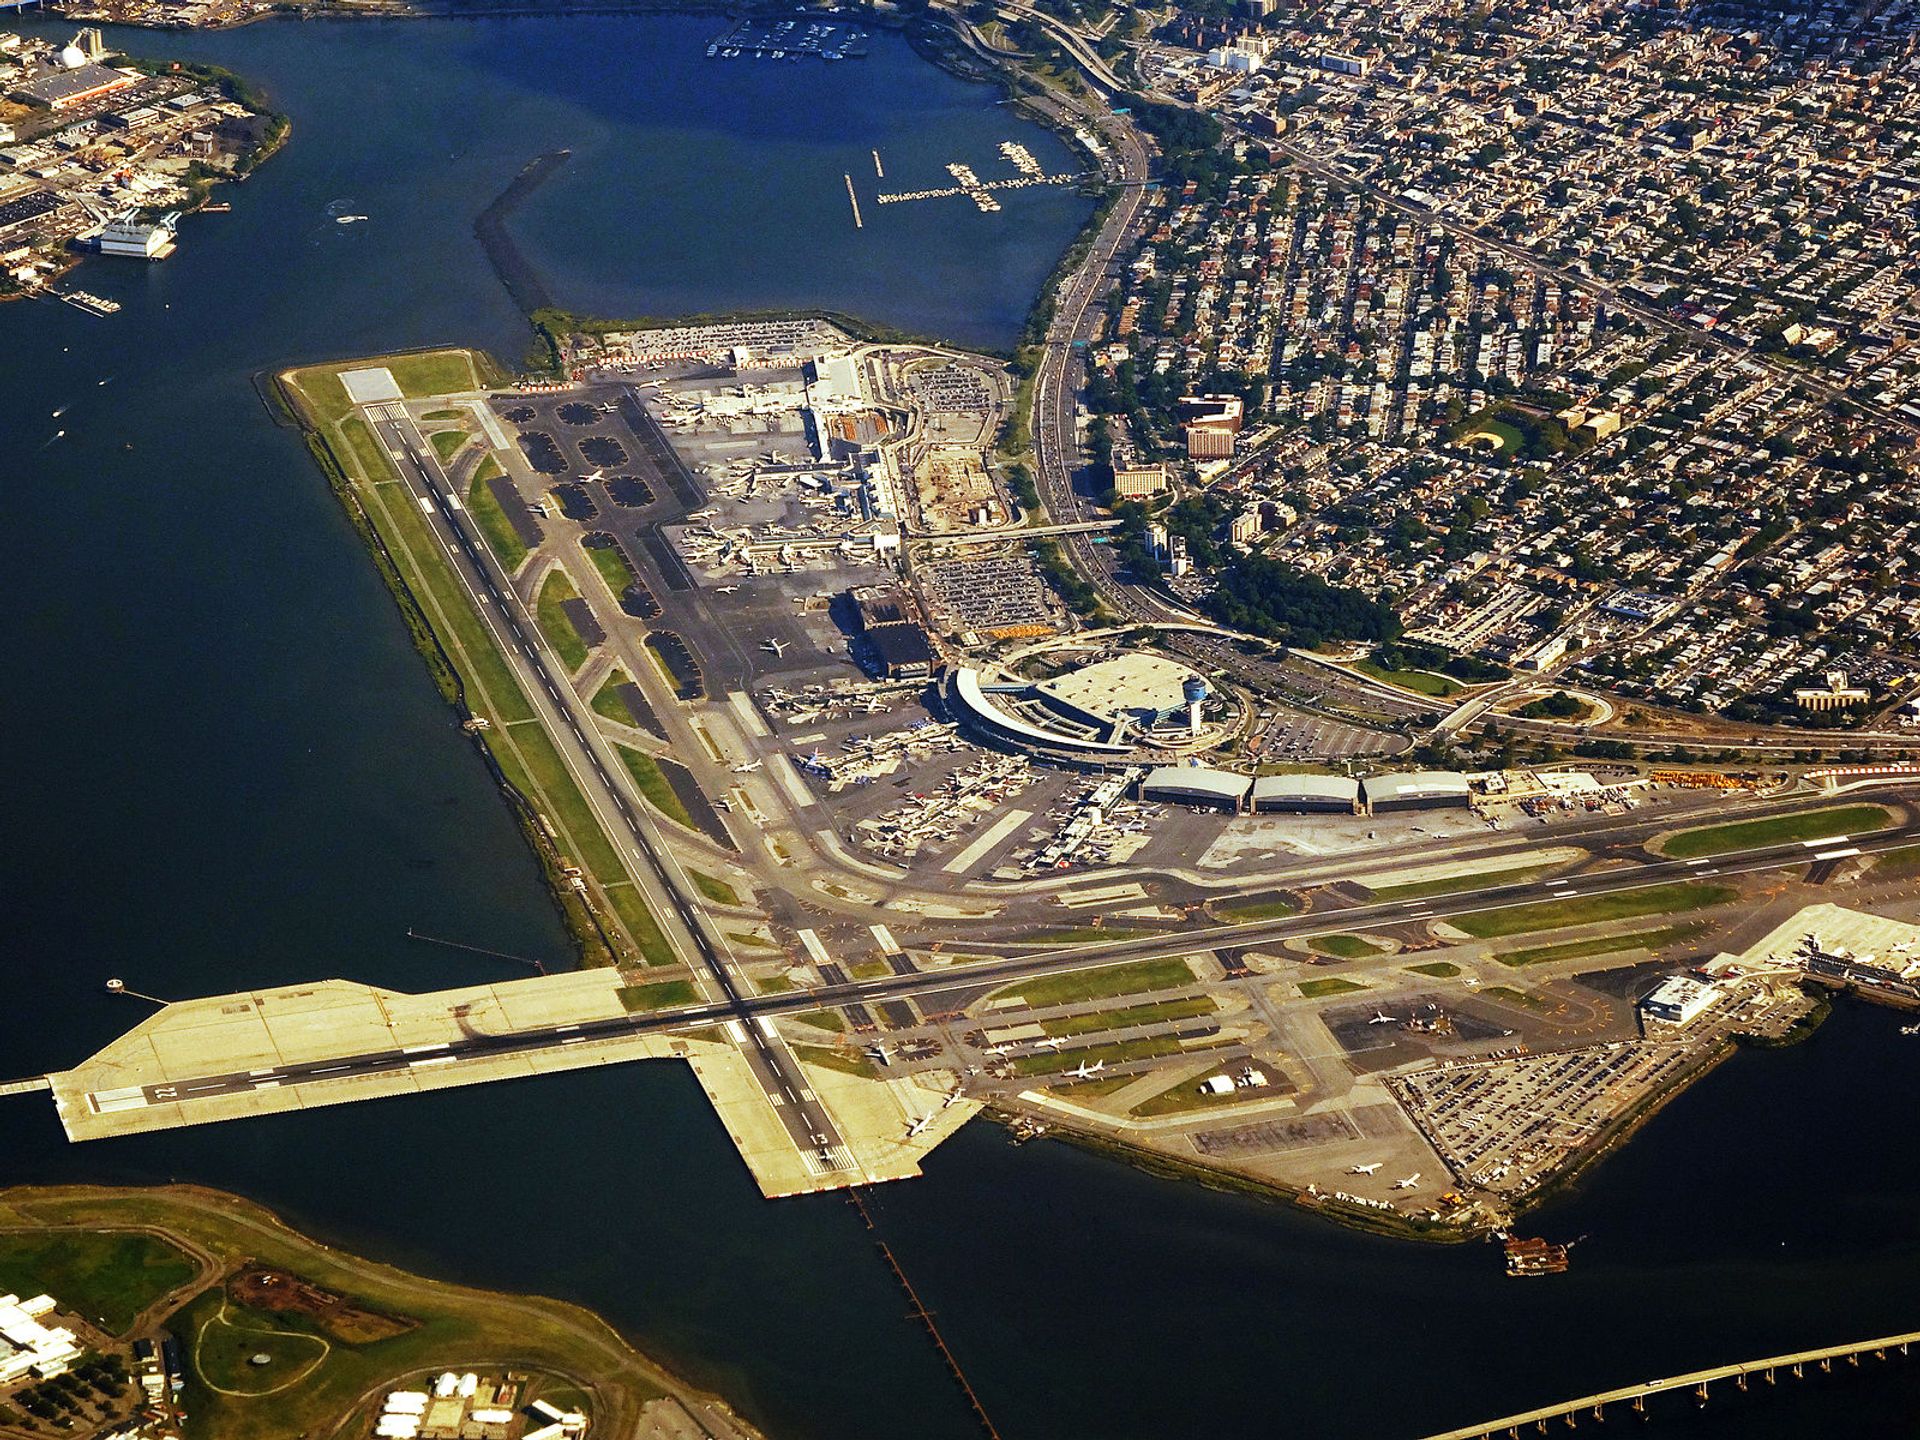 Aerial photo of LaGuardia Airport before the renovation, which broke ground in 2016 Photo by Patrick Handrigan, via Wikimedia Commons